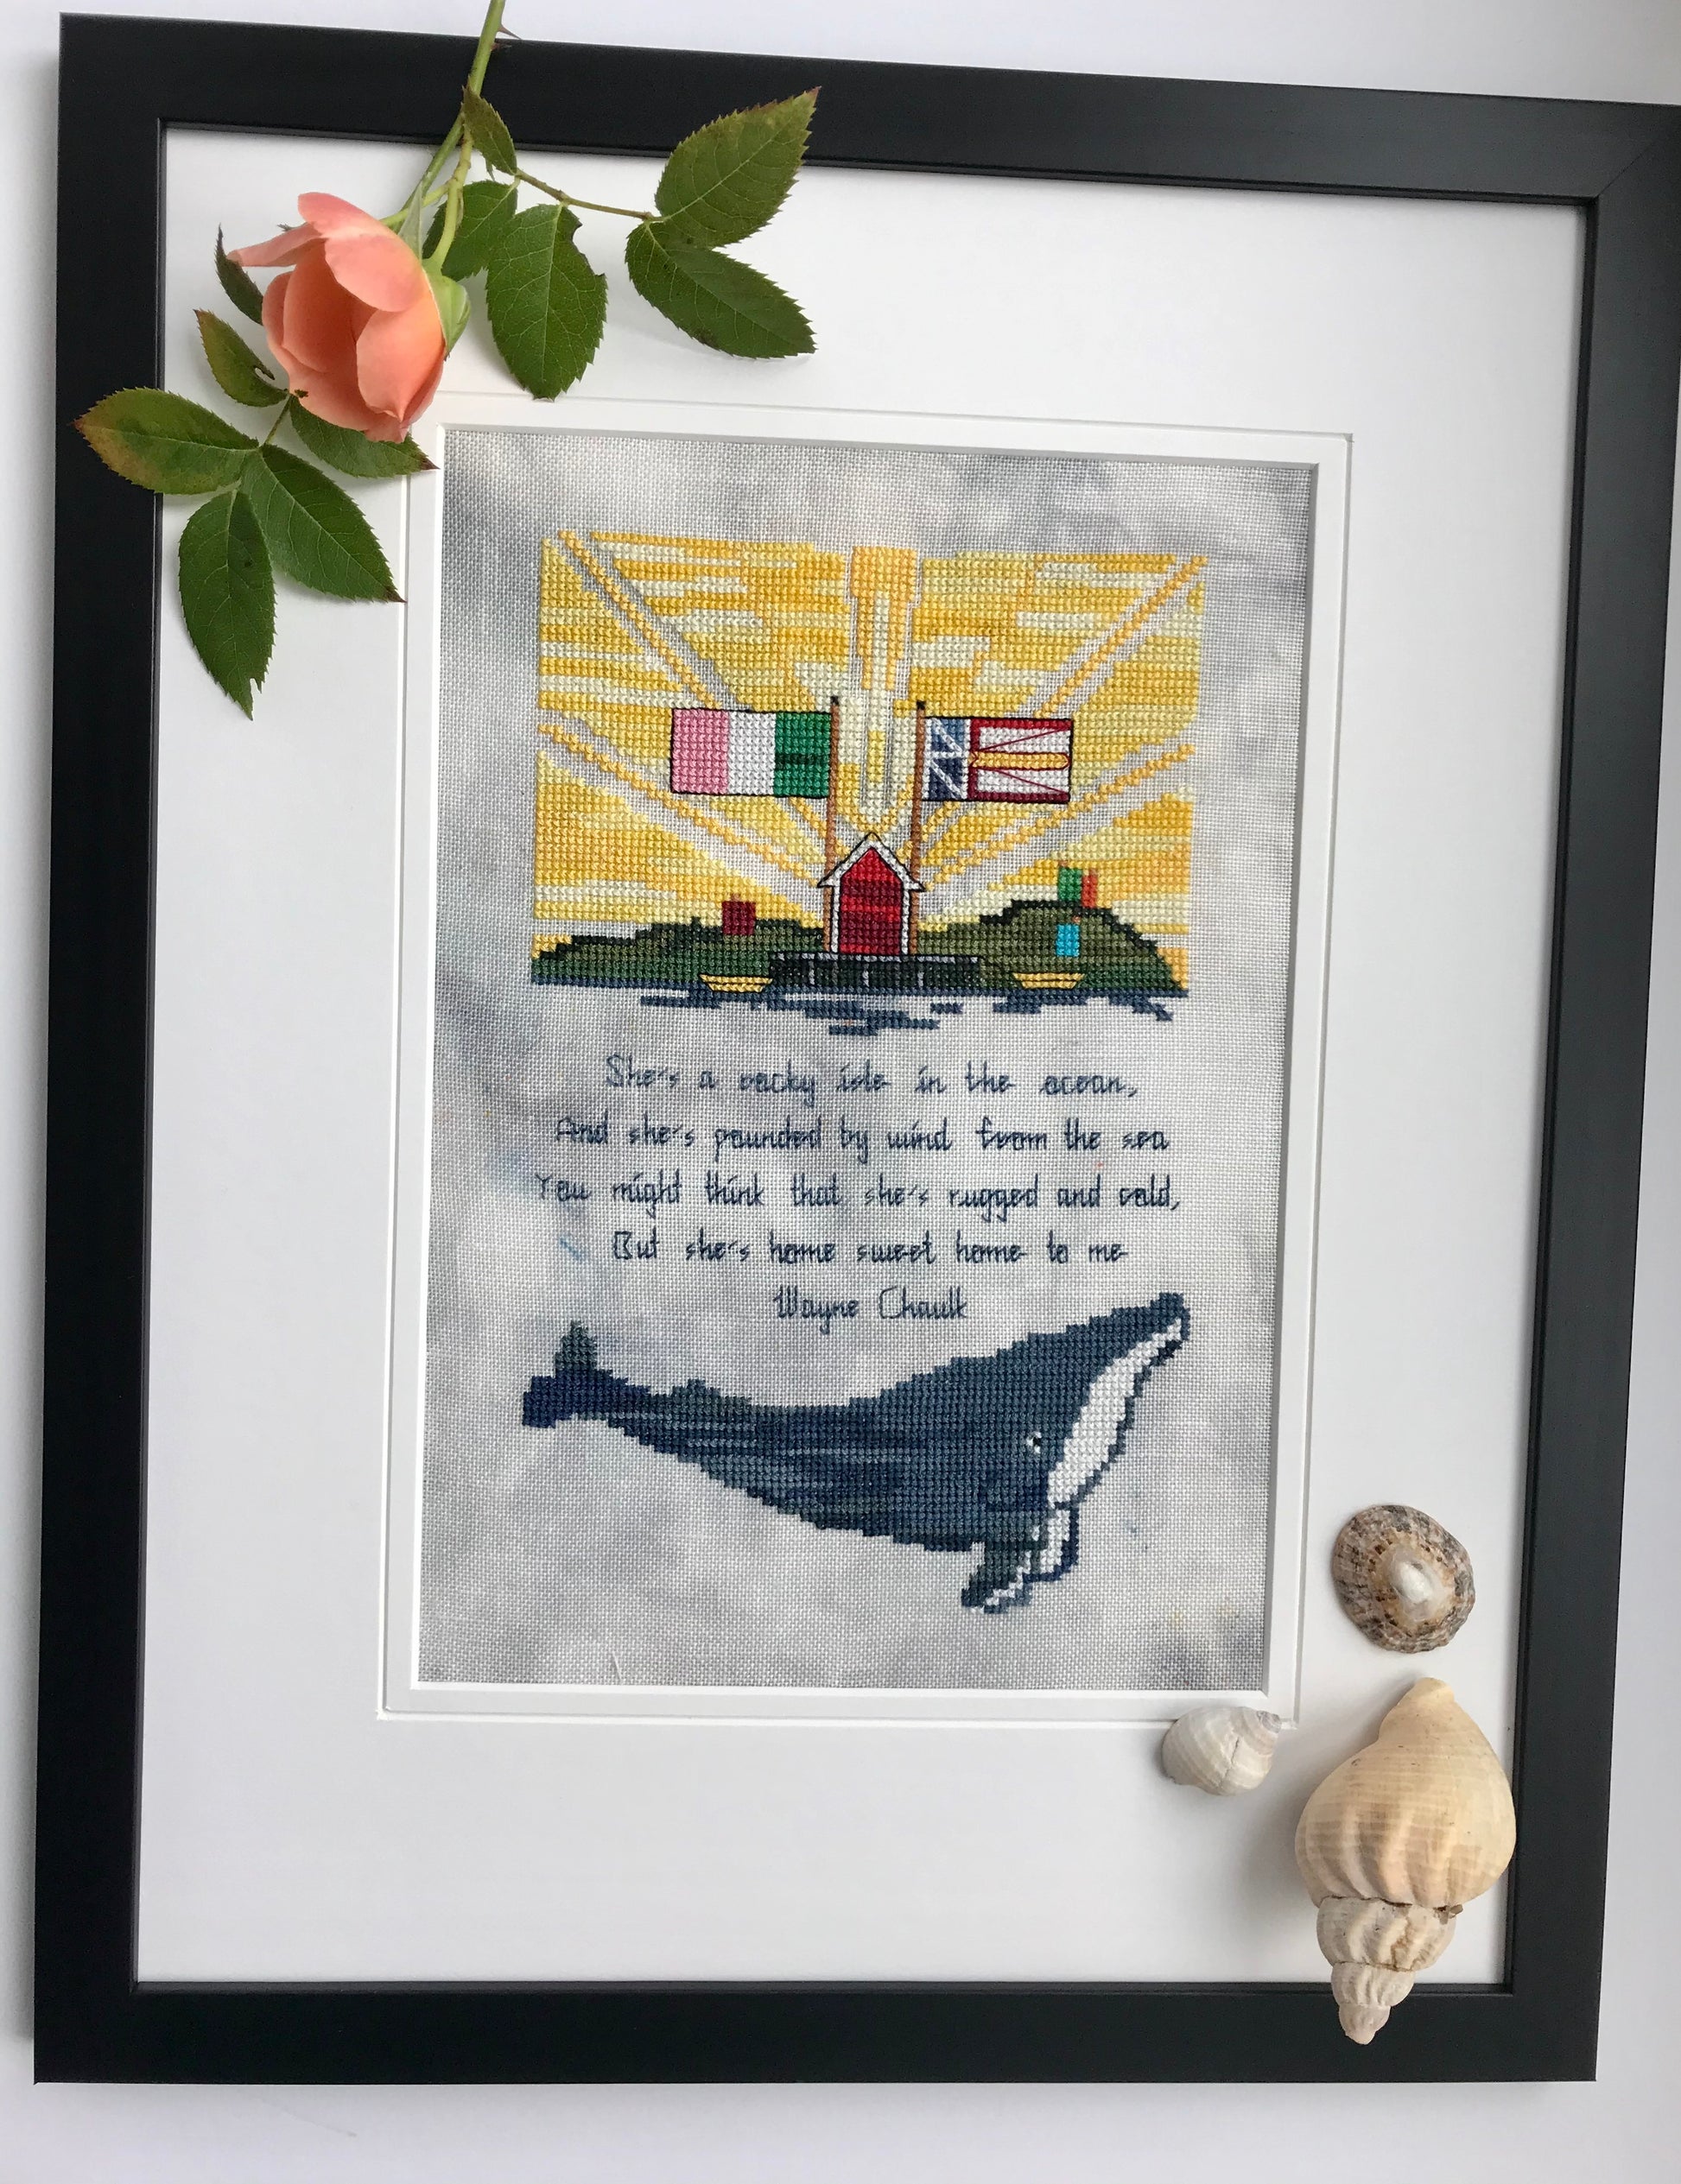 Black wooden frame with a white mat and a real peach rose at the left corner on top of a cross stitched piece. Three different types of shells are on top of the mat on the bottom right. Cross stitched picture in the middle depicts two flags, a fishing stage, green hills, a song verse and a humpback whale.